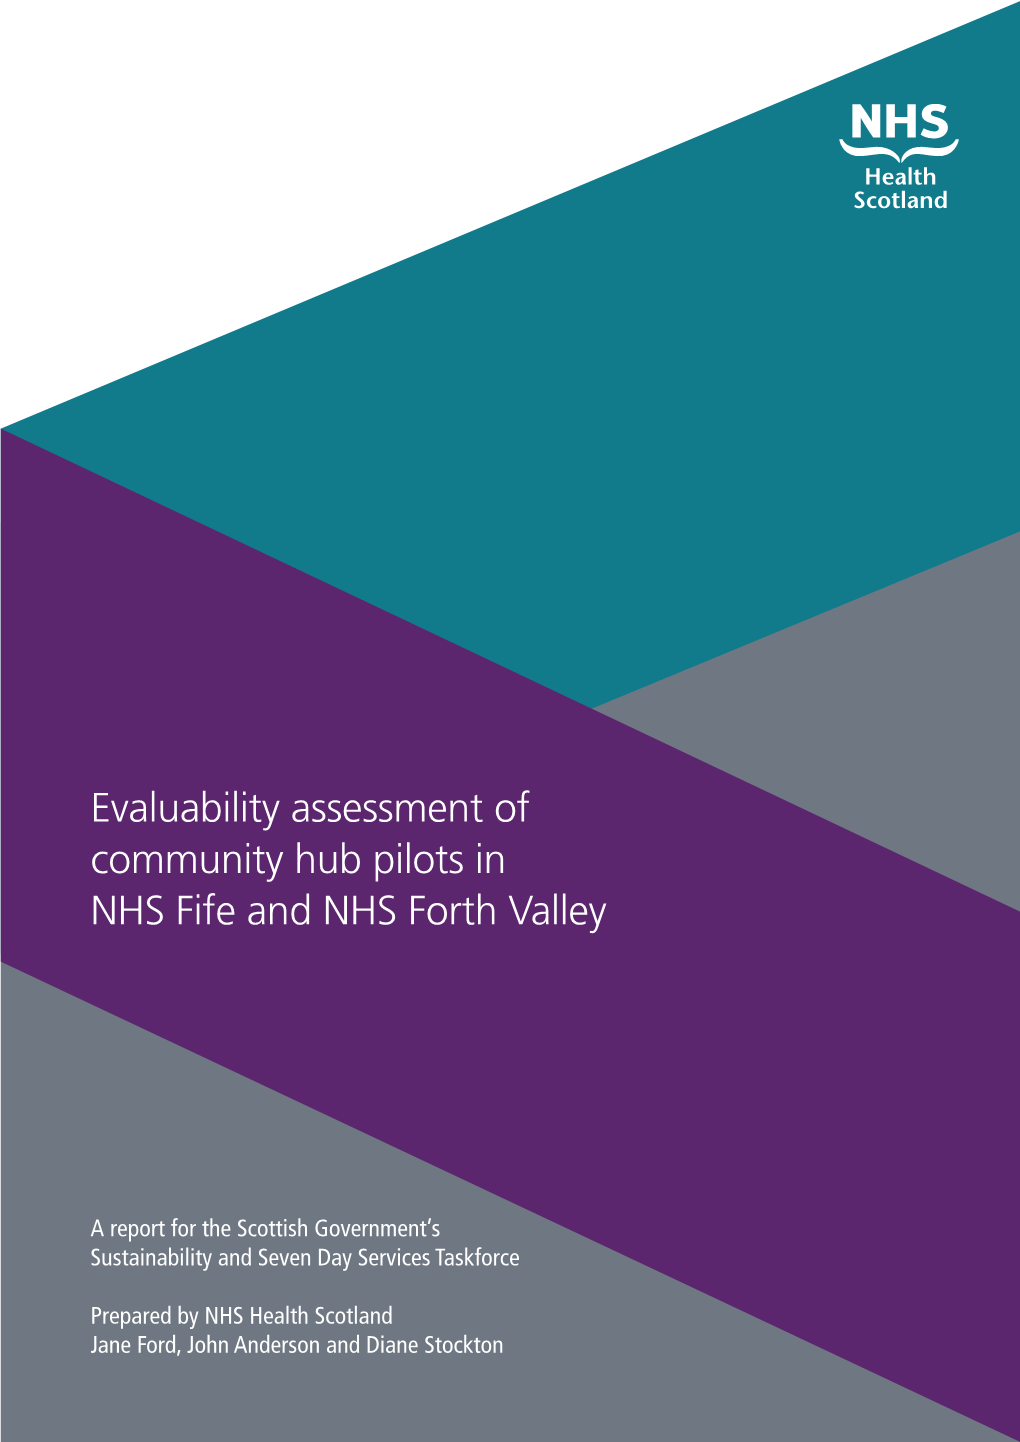 Evaluability Assessment of Community Hub Pilots in NHS Fife and NHS Forth Valley